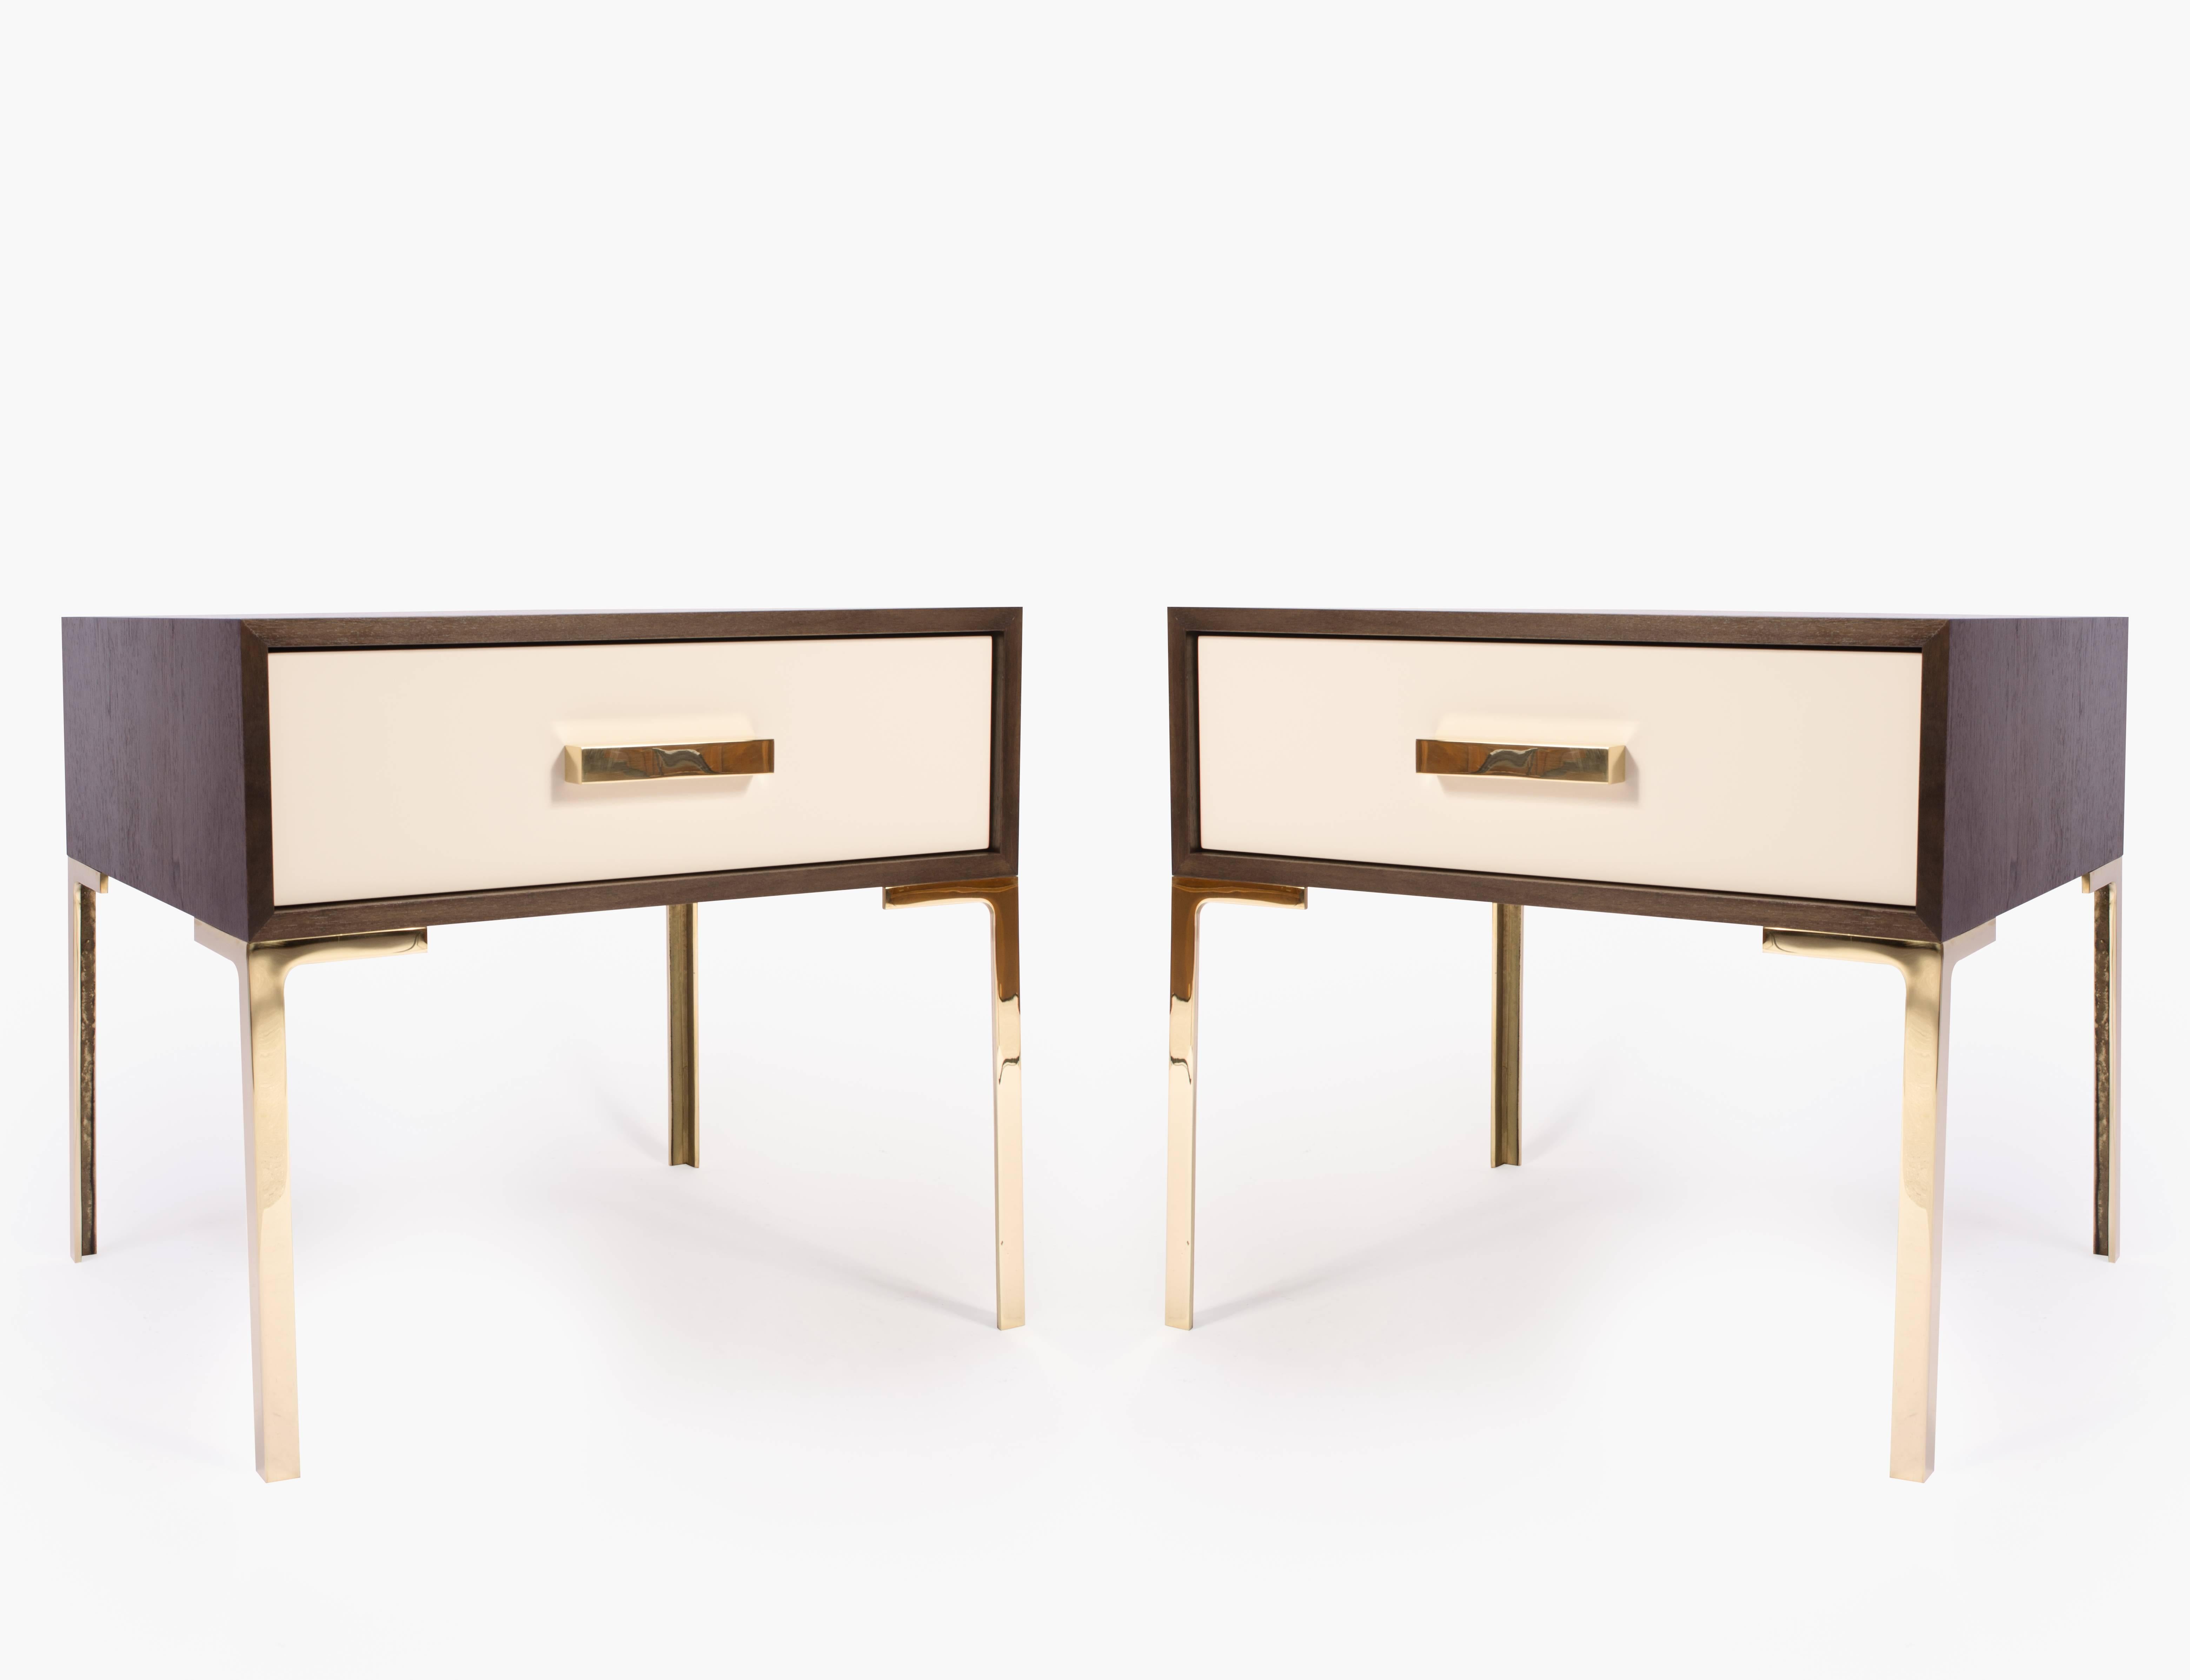 A stunning creation by Montage, the Astor nightstand. These were designed with the Mid-Century in mind embodying delicate proportions and bold use of the highest quality materials. 

Each nightstand has been graced by the hands of multiple local